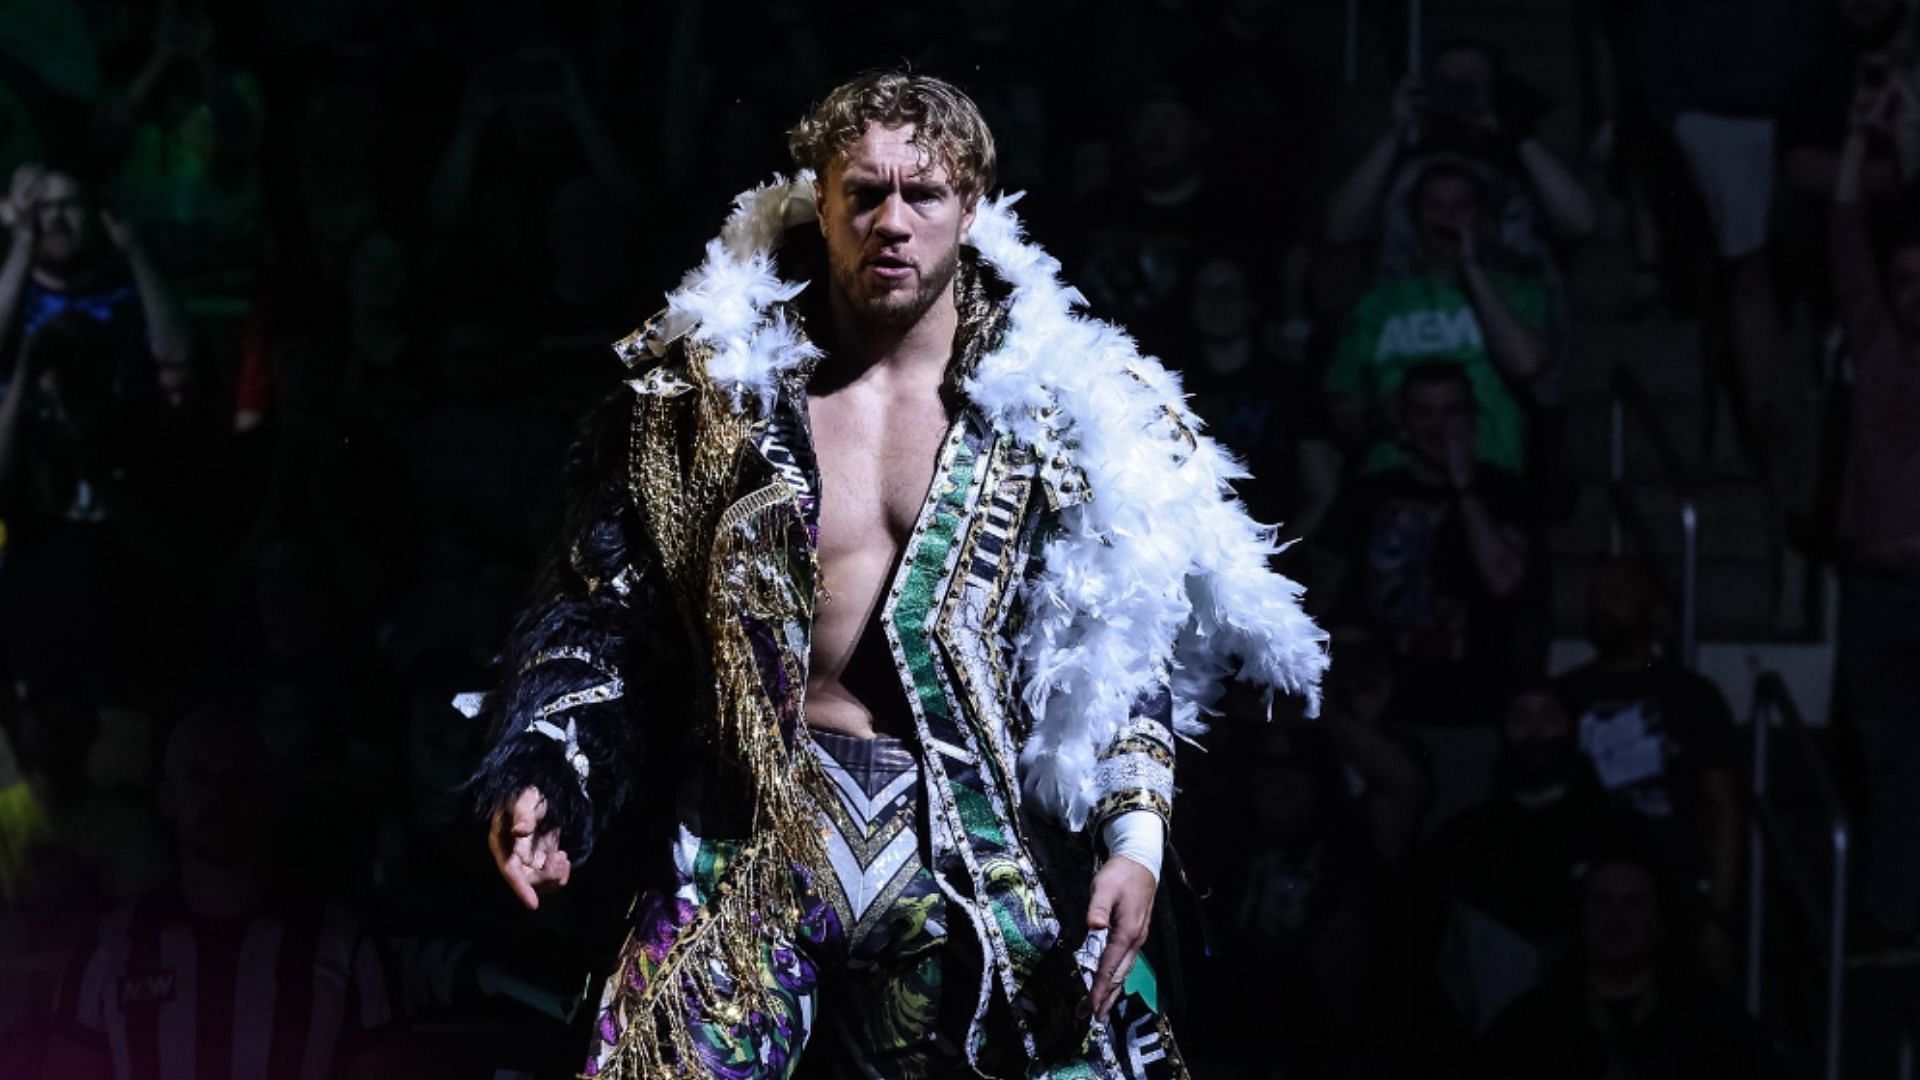 Will Ospreay is a former IWGP World Heavyweight Champion [Image Credits: Ospreay